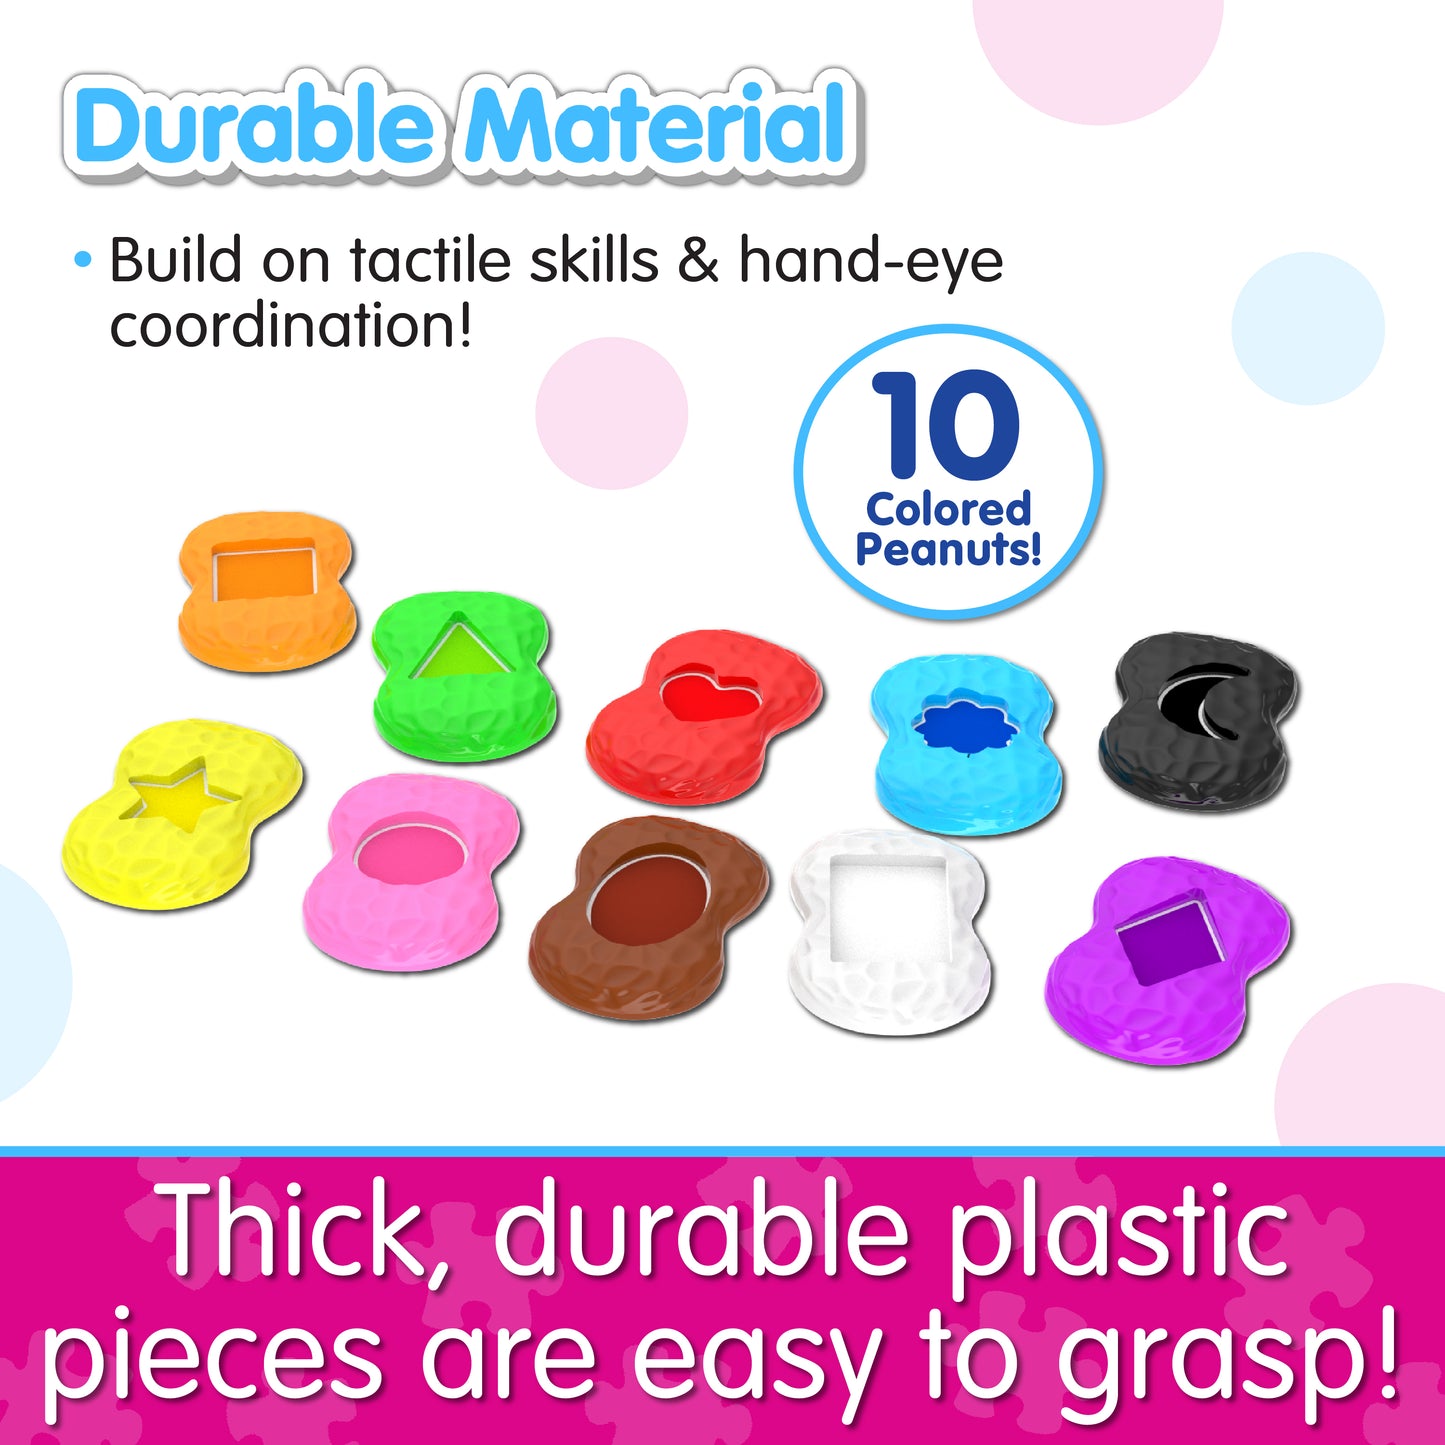 Infographic of Learn With Me Shapes Elephant's pieces that reads, "Thick, durable plastic pieces are easy to grasp!"